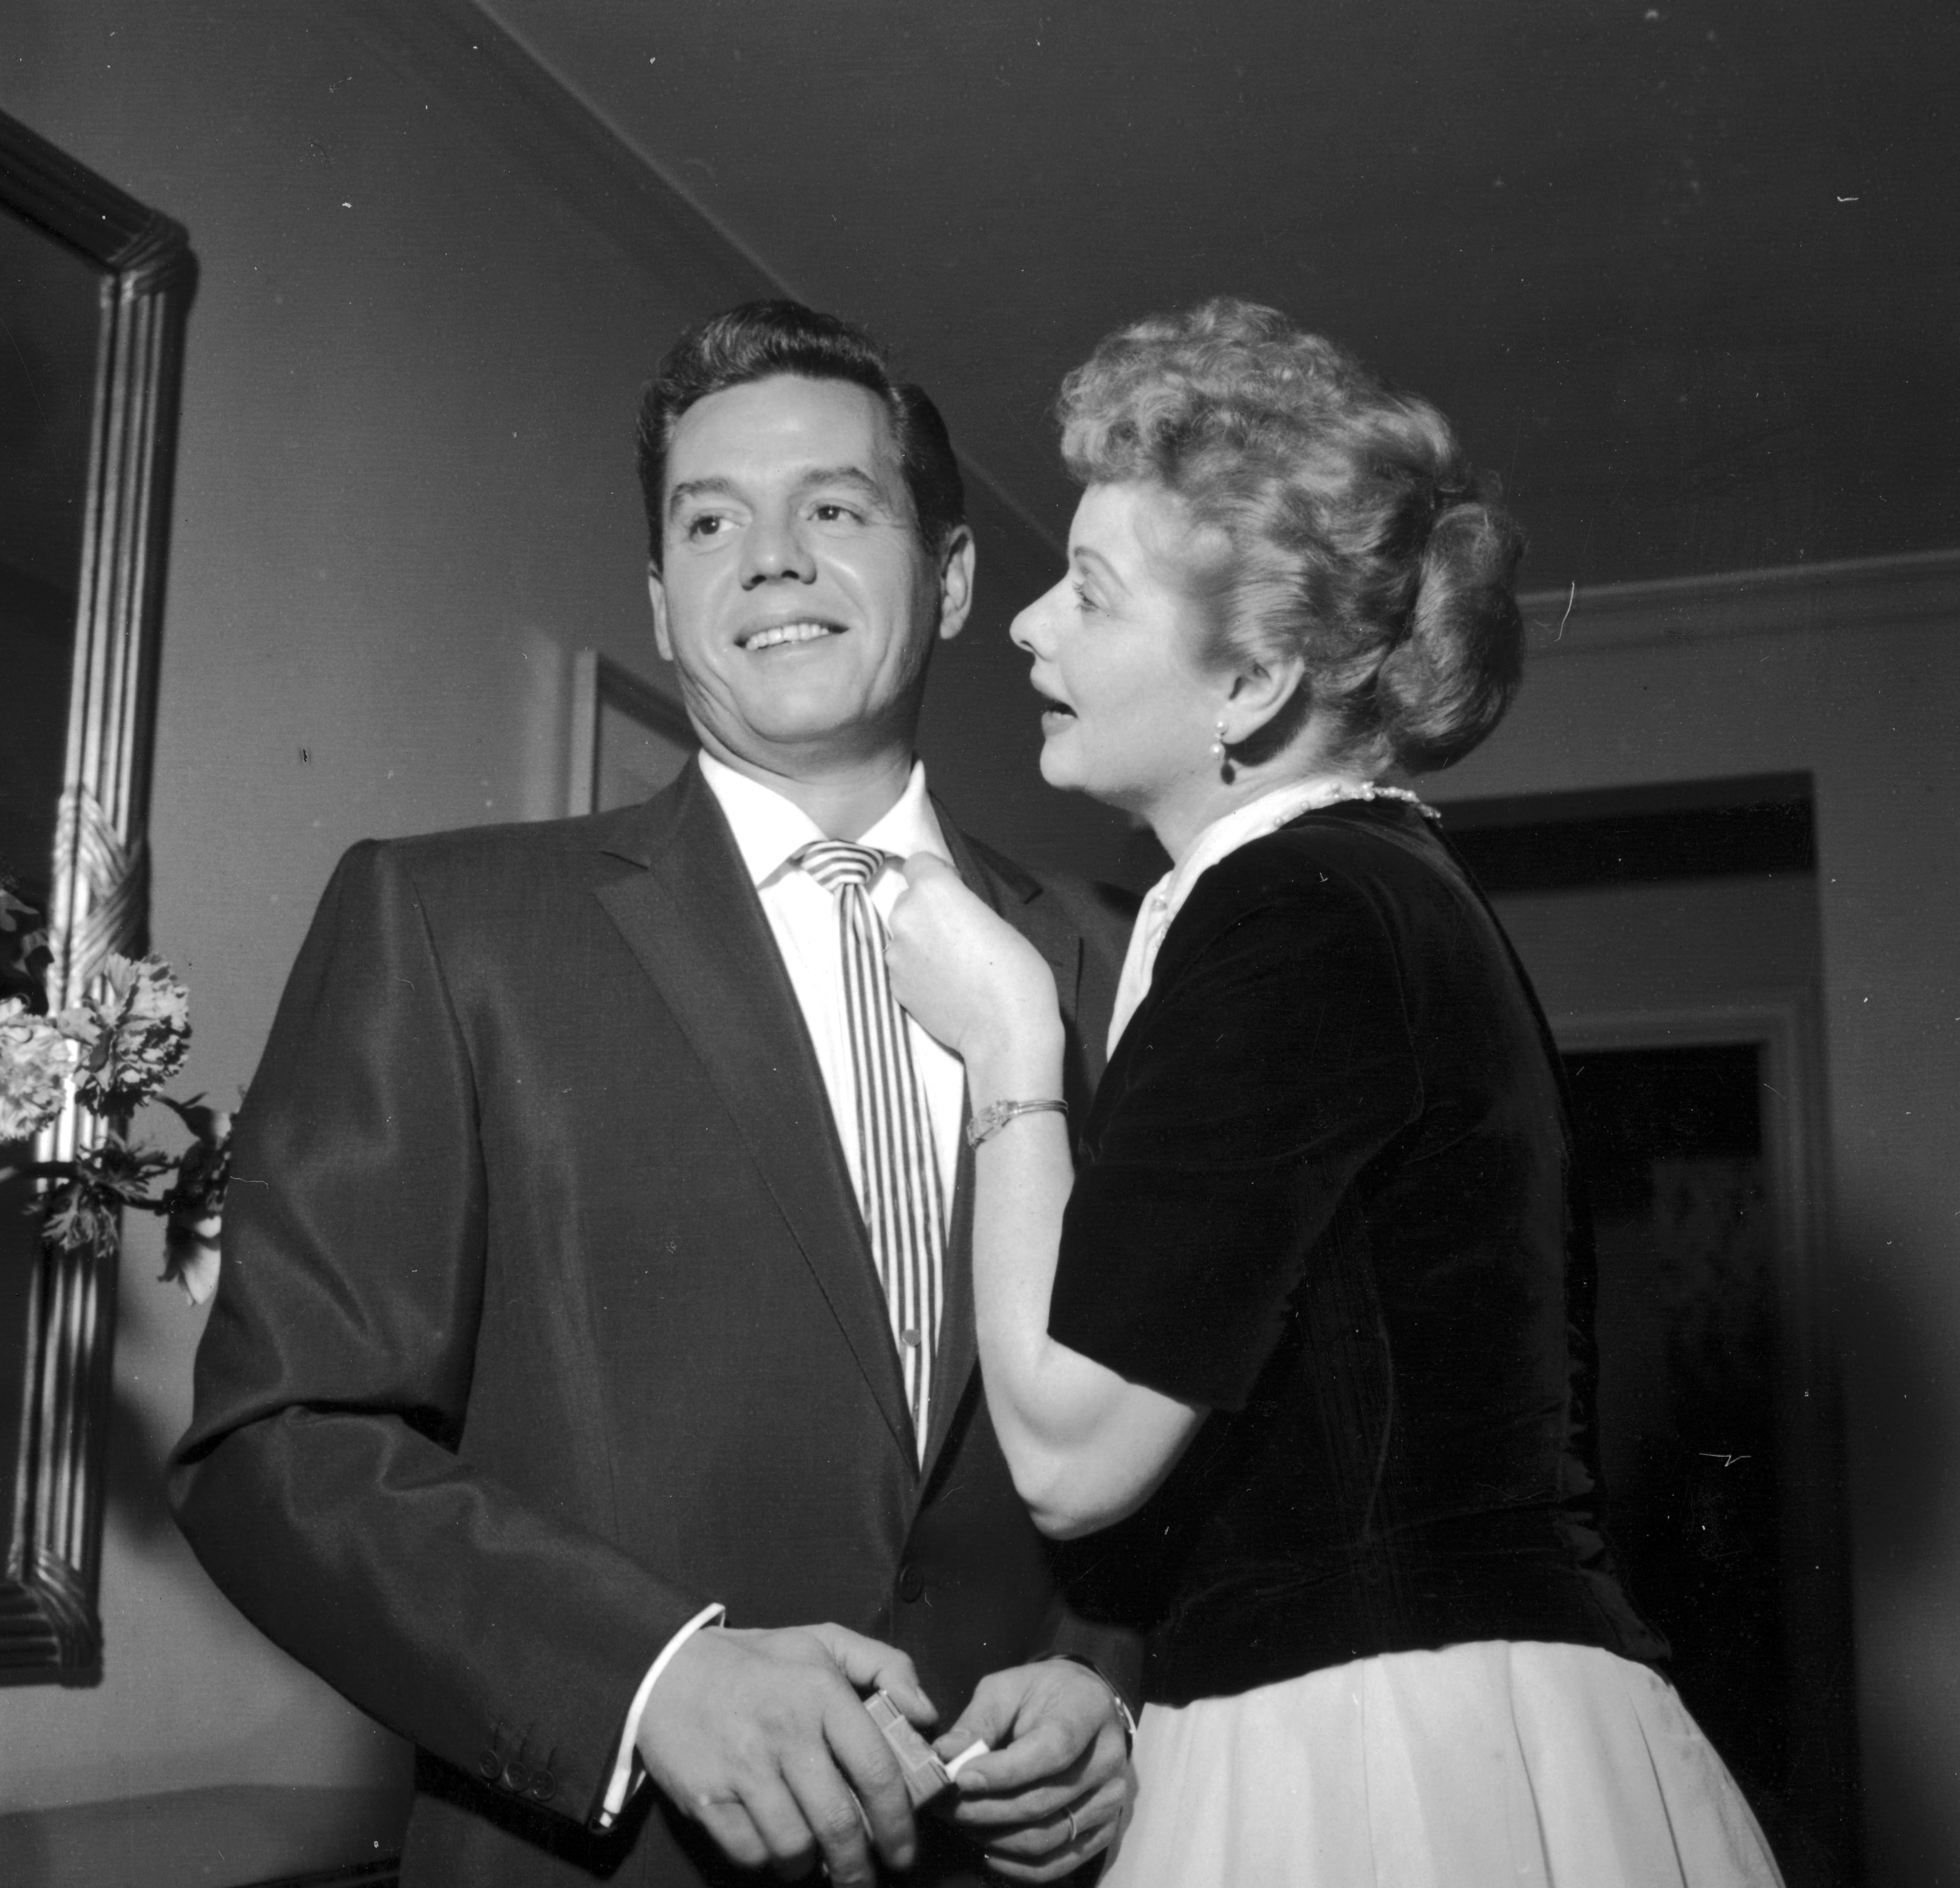 'I Love Lucy' stars Lucille Ball and Desi Arnaz